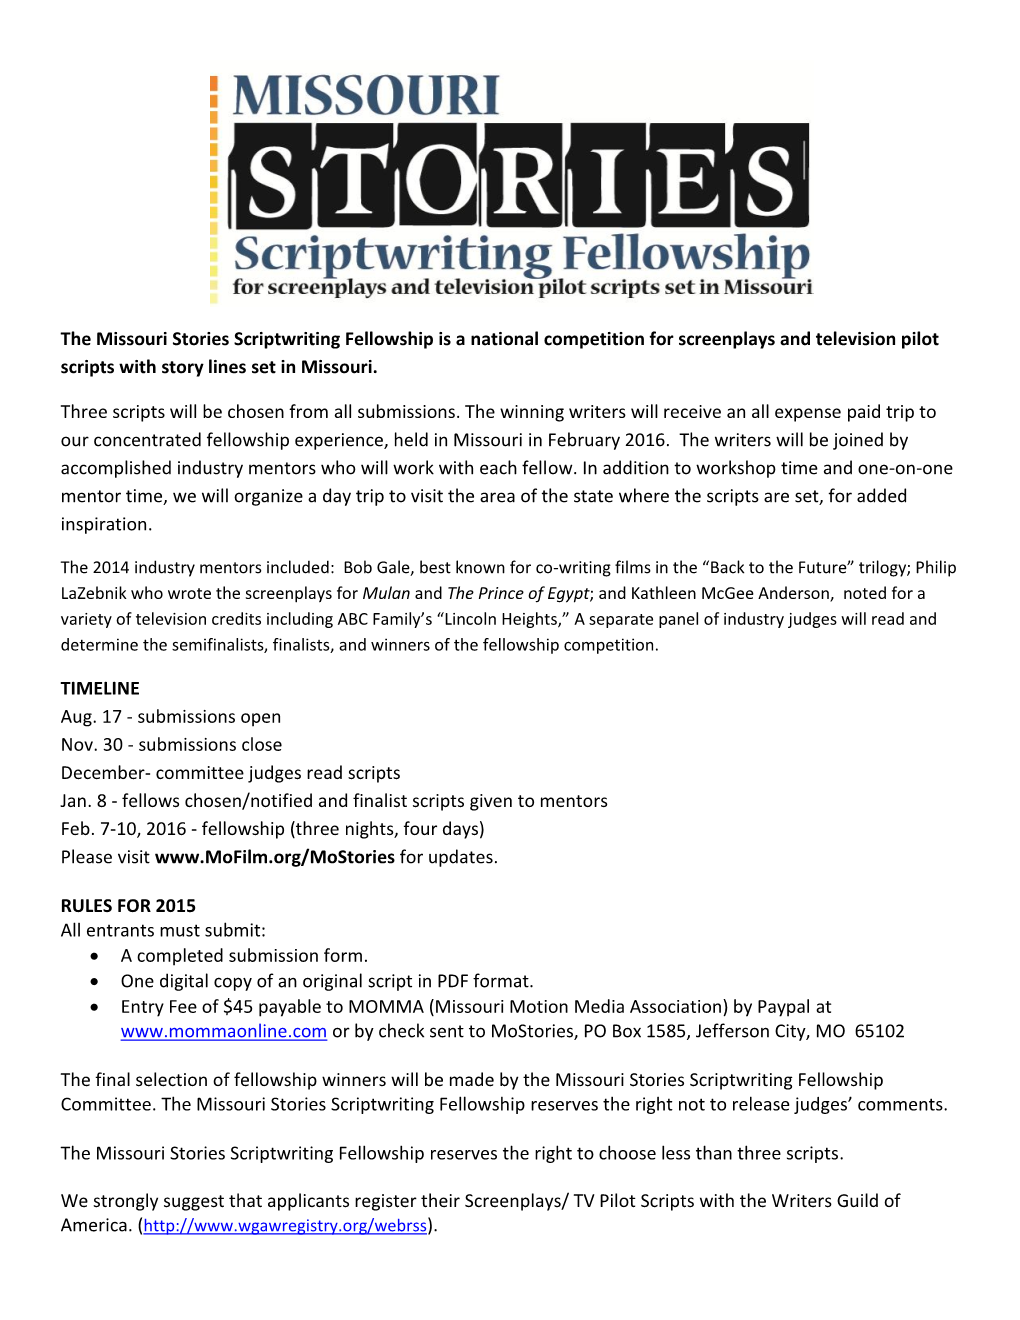 The Missouri Stories Scriptwriting Fellowship Is a National Competition for Screenplays and Television Pilot Scripts with Story Lines Set in Missouri